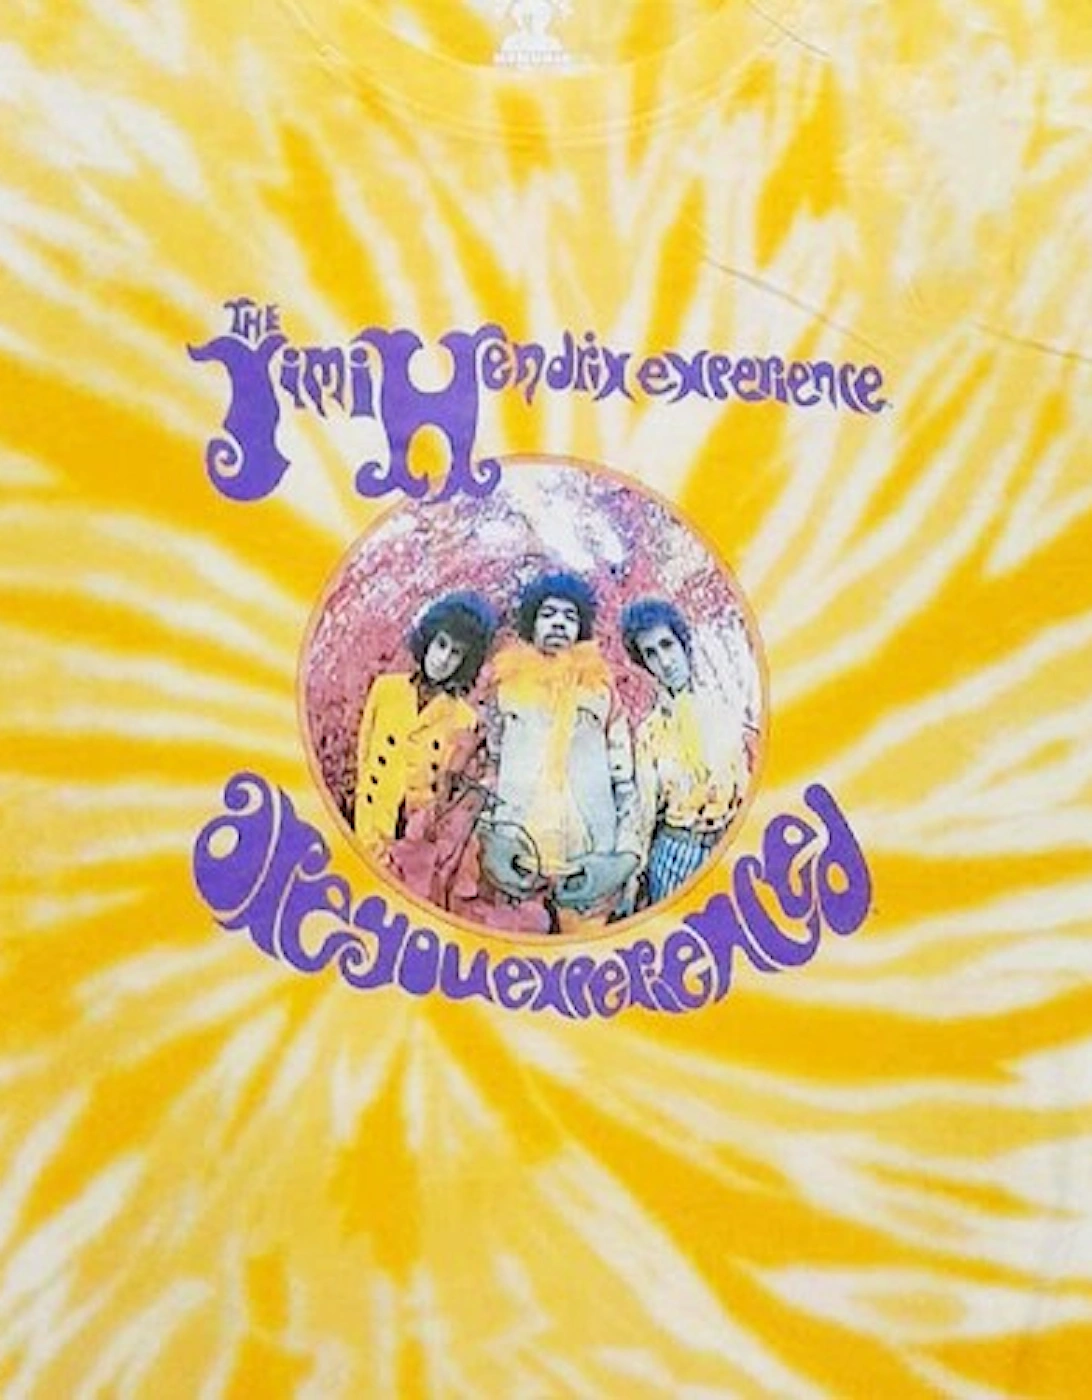 Childrens/Kids Are You Experienced Tie Dye T-Shirt